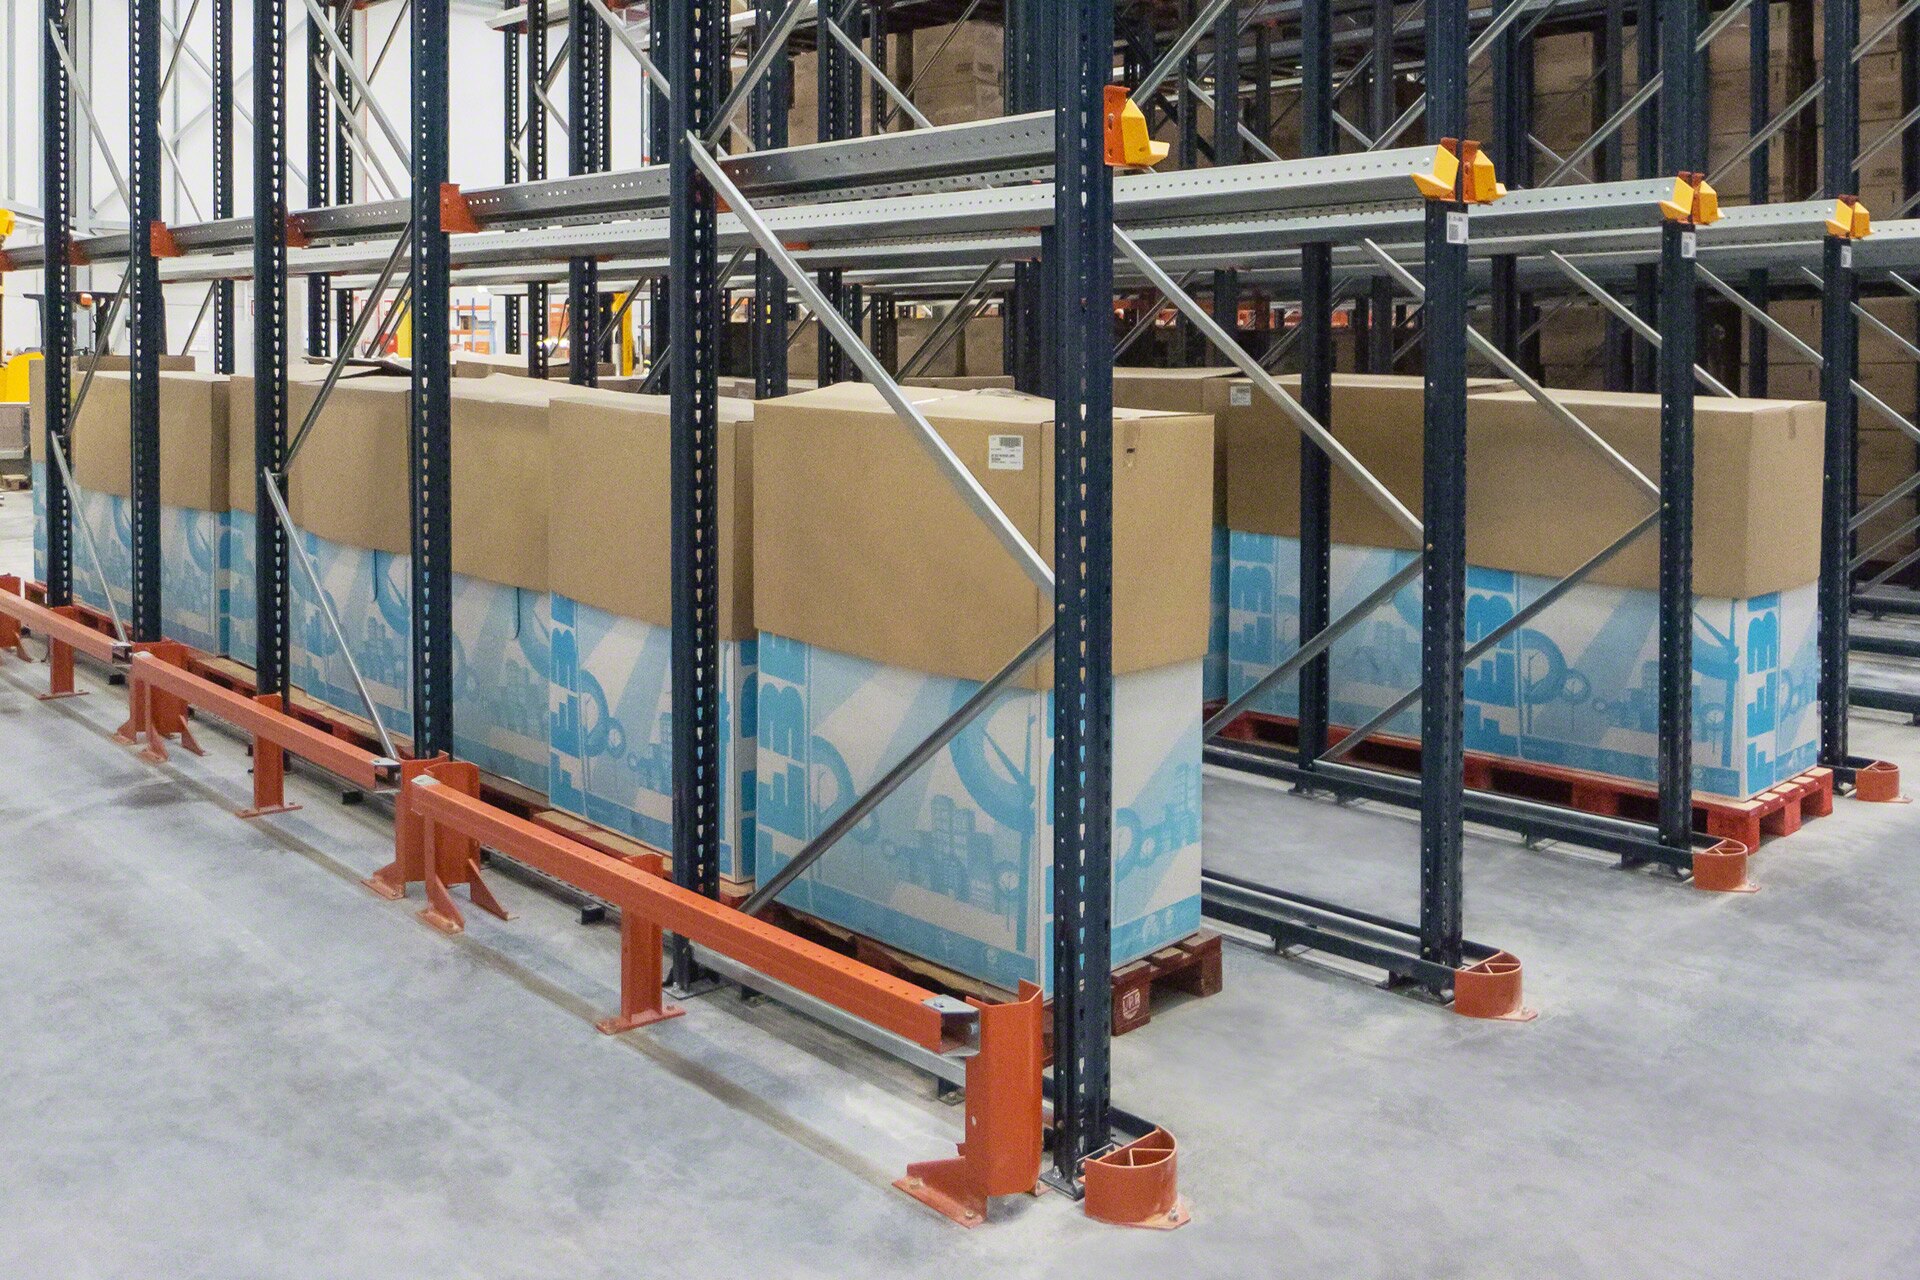 The upright footplates have side guards to prevent forklift damage to the structure